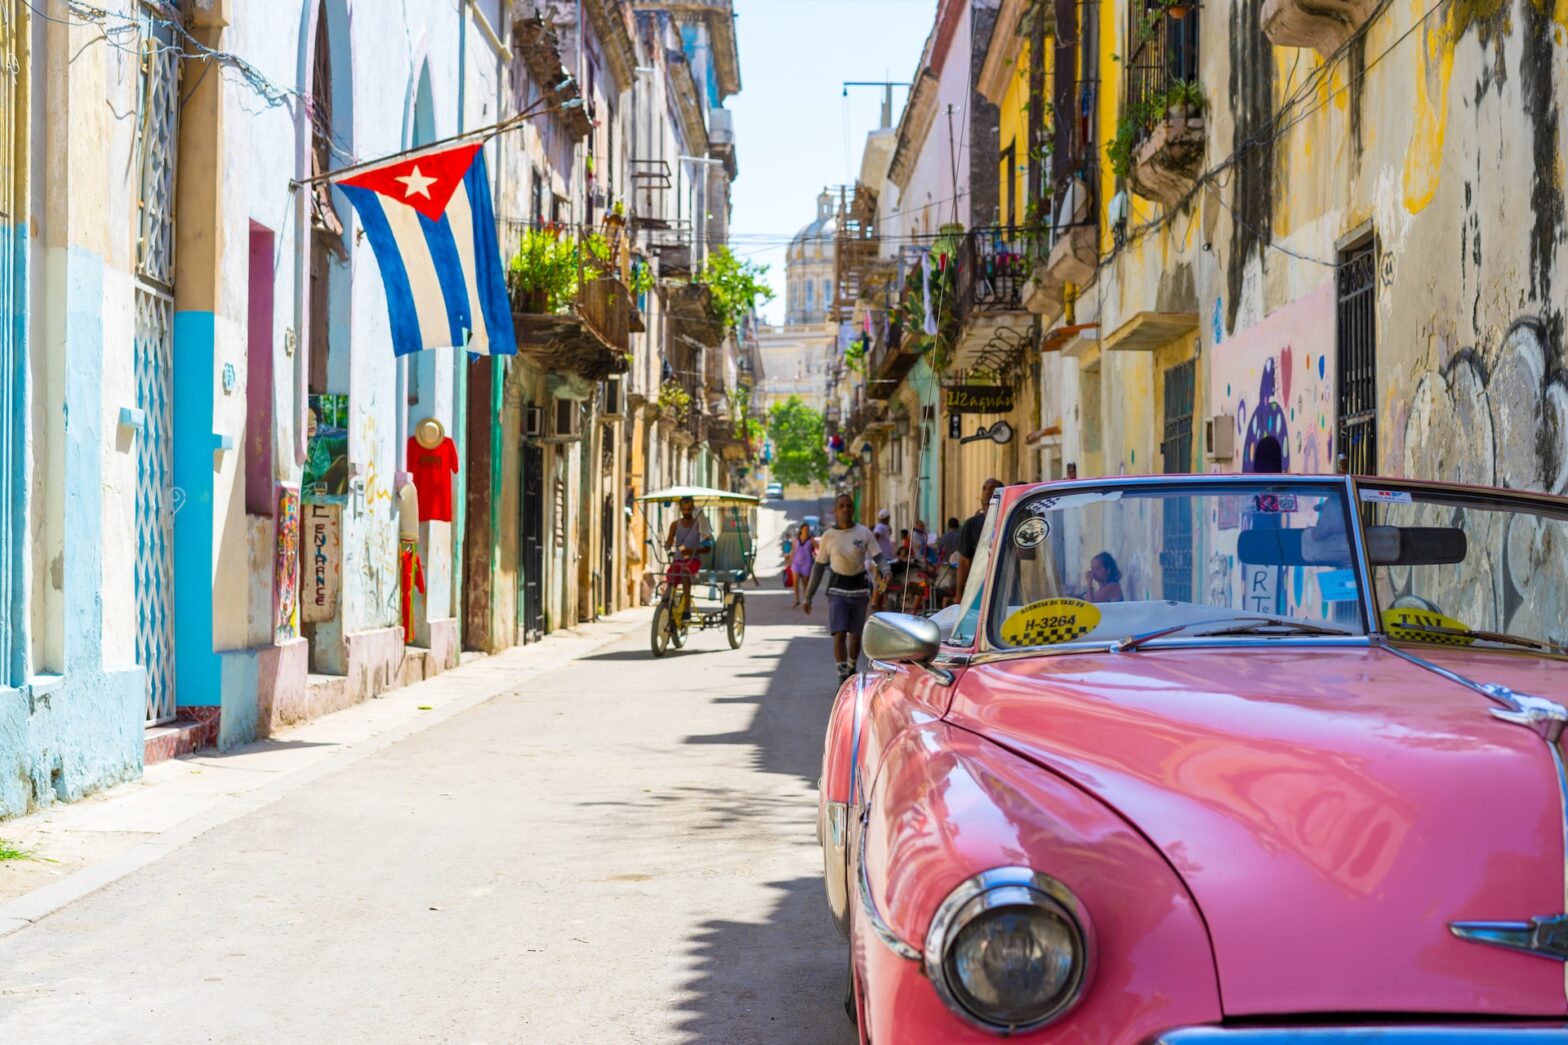 10 Fun Facts About Cuba That Reveal the Marvel of This Caribbean Nation